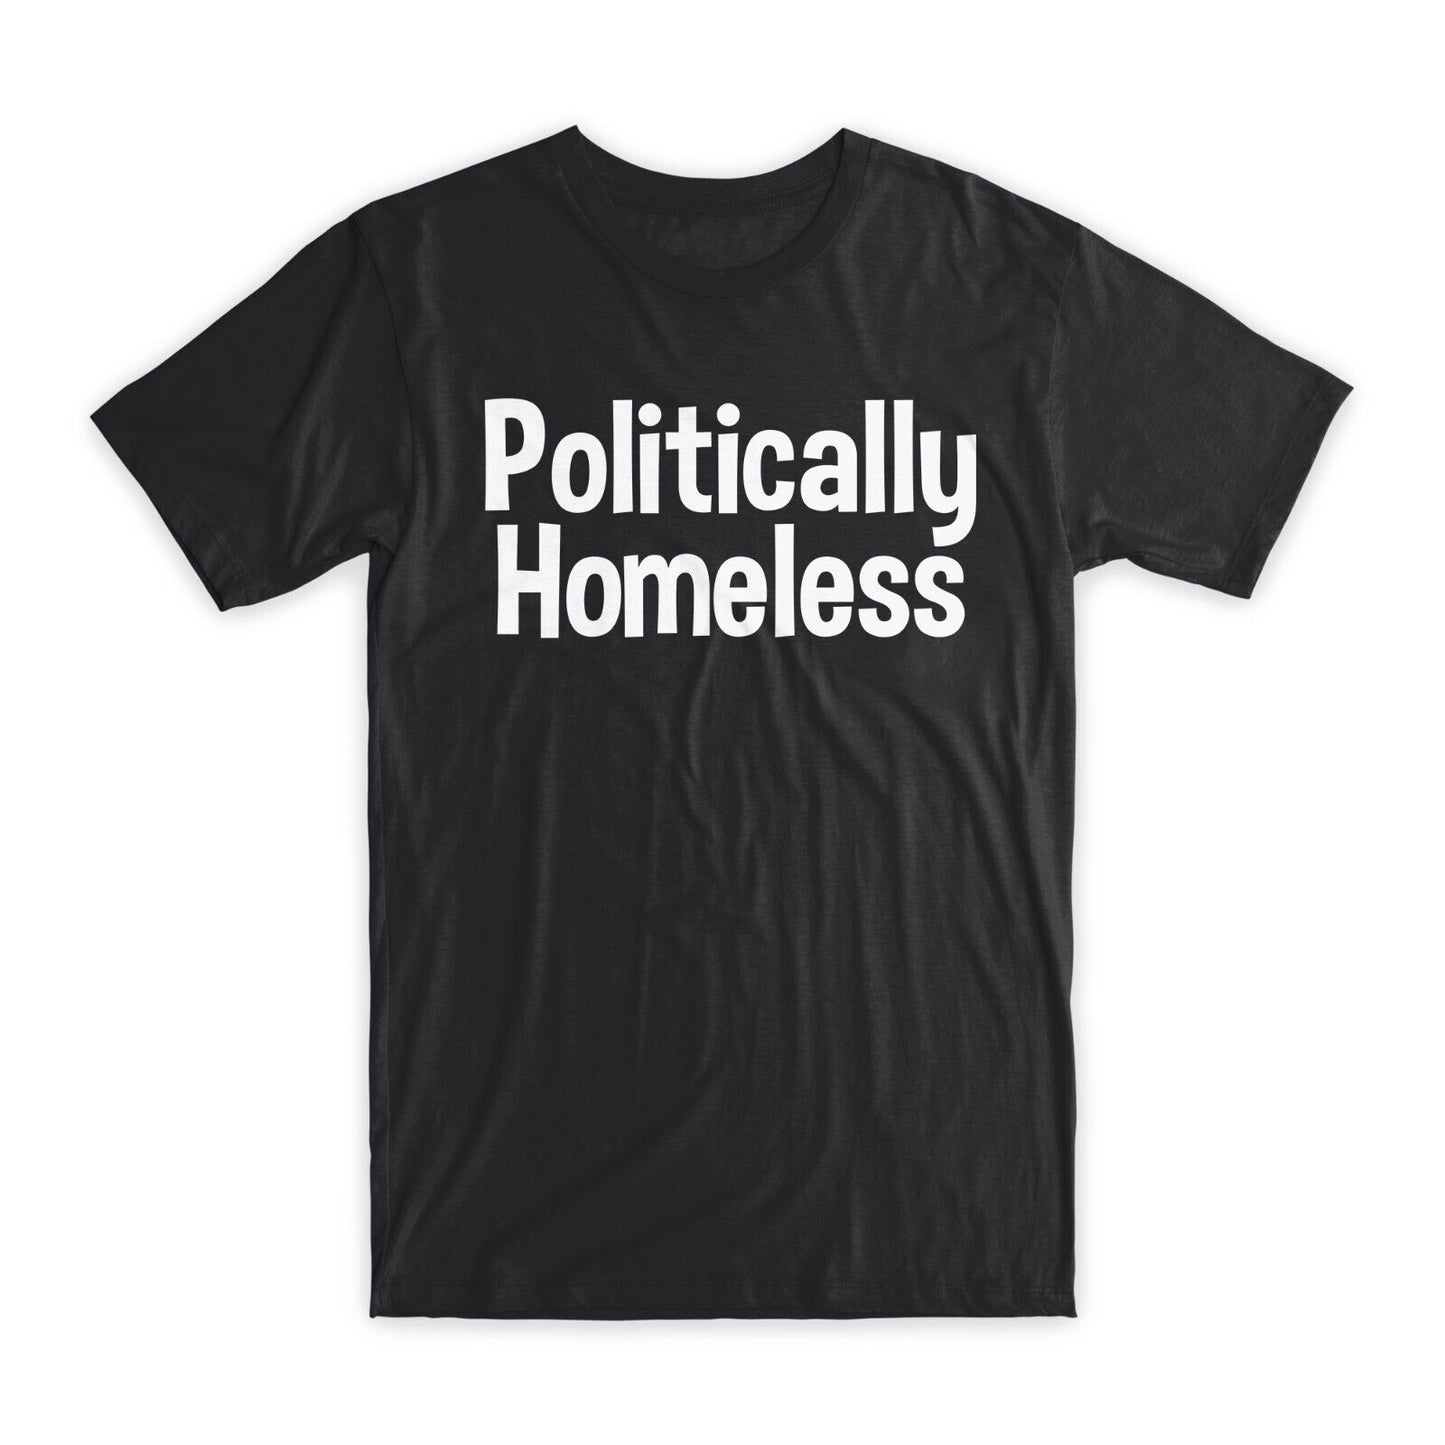 Politically Homeless T-Shirt Premium Soft Cotton Crew Neck Funny Tees Gifts NEW